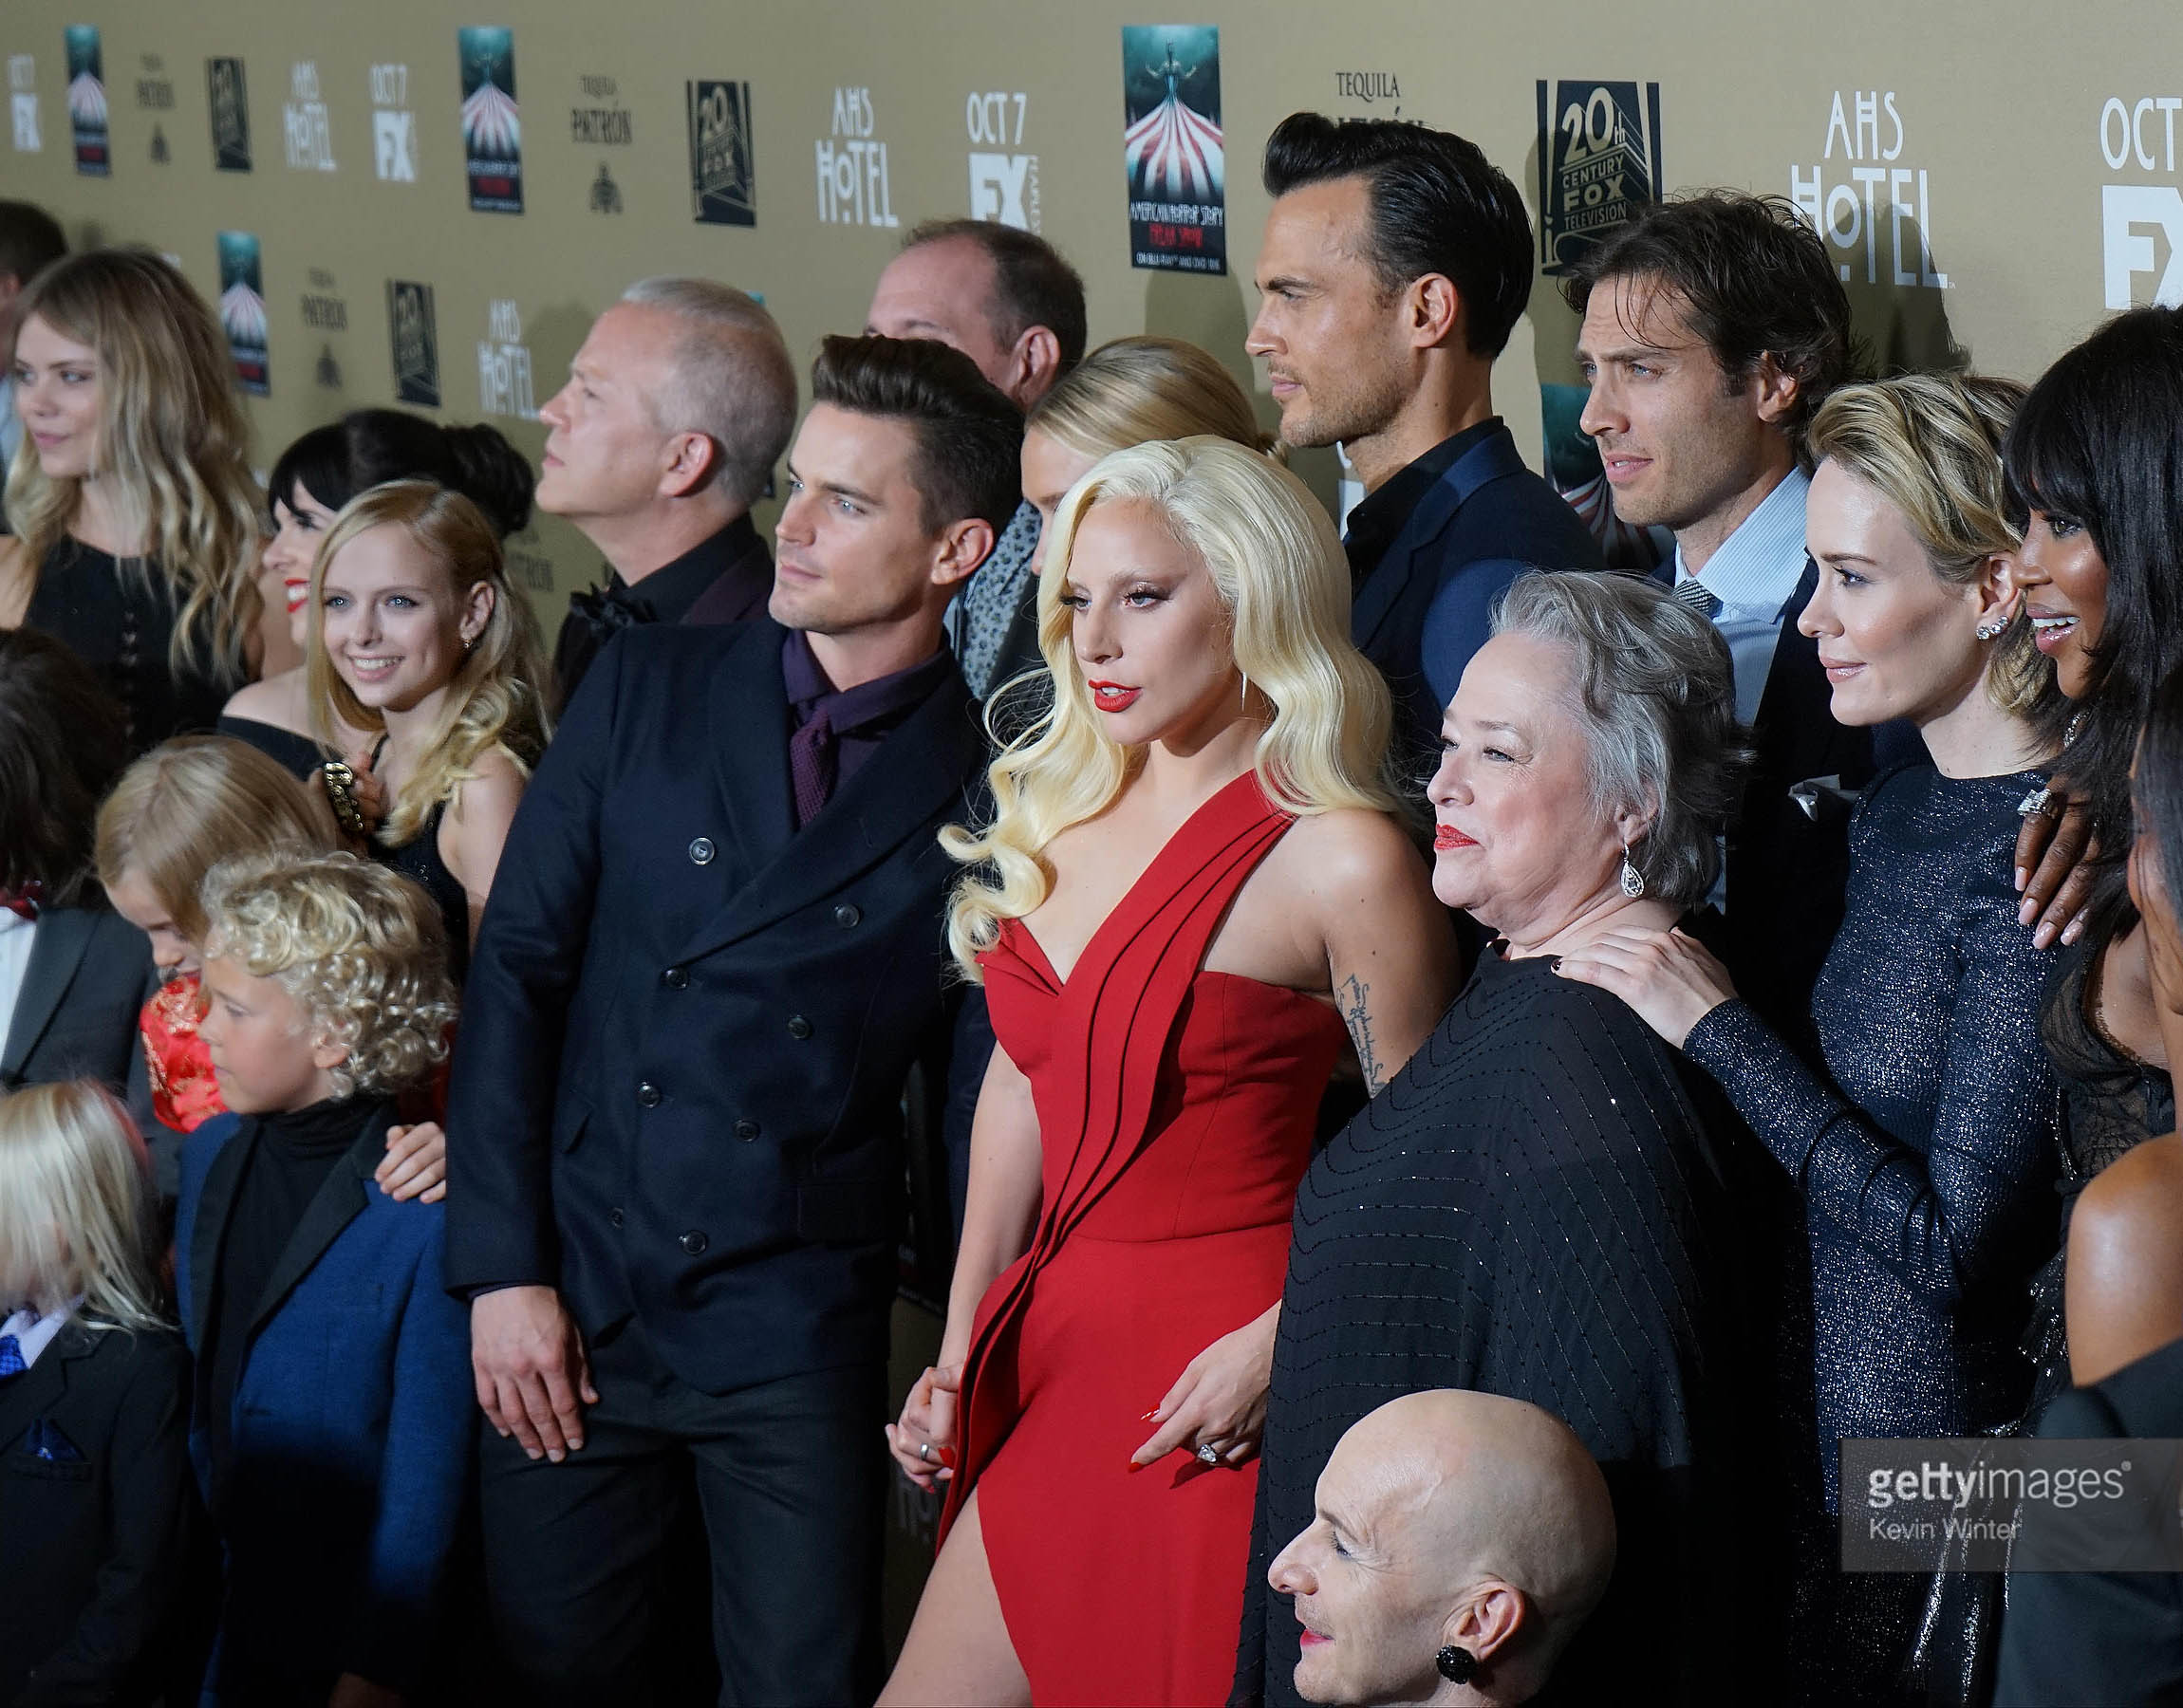 AHS cast attends the premiere screening of FX's 'American Horror Story: Hotel' at Regal Cinemas L.A. Live on October 3, 2015 in Los Angeles, California.